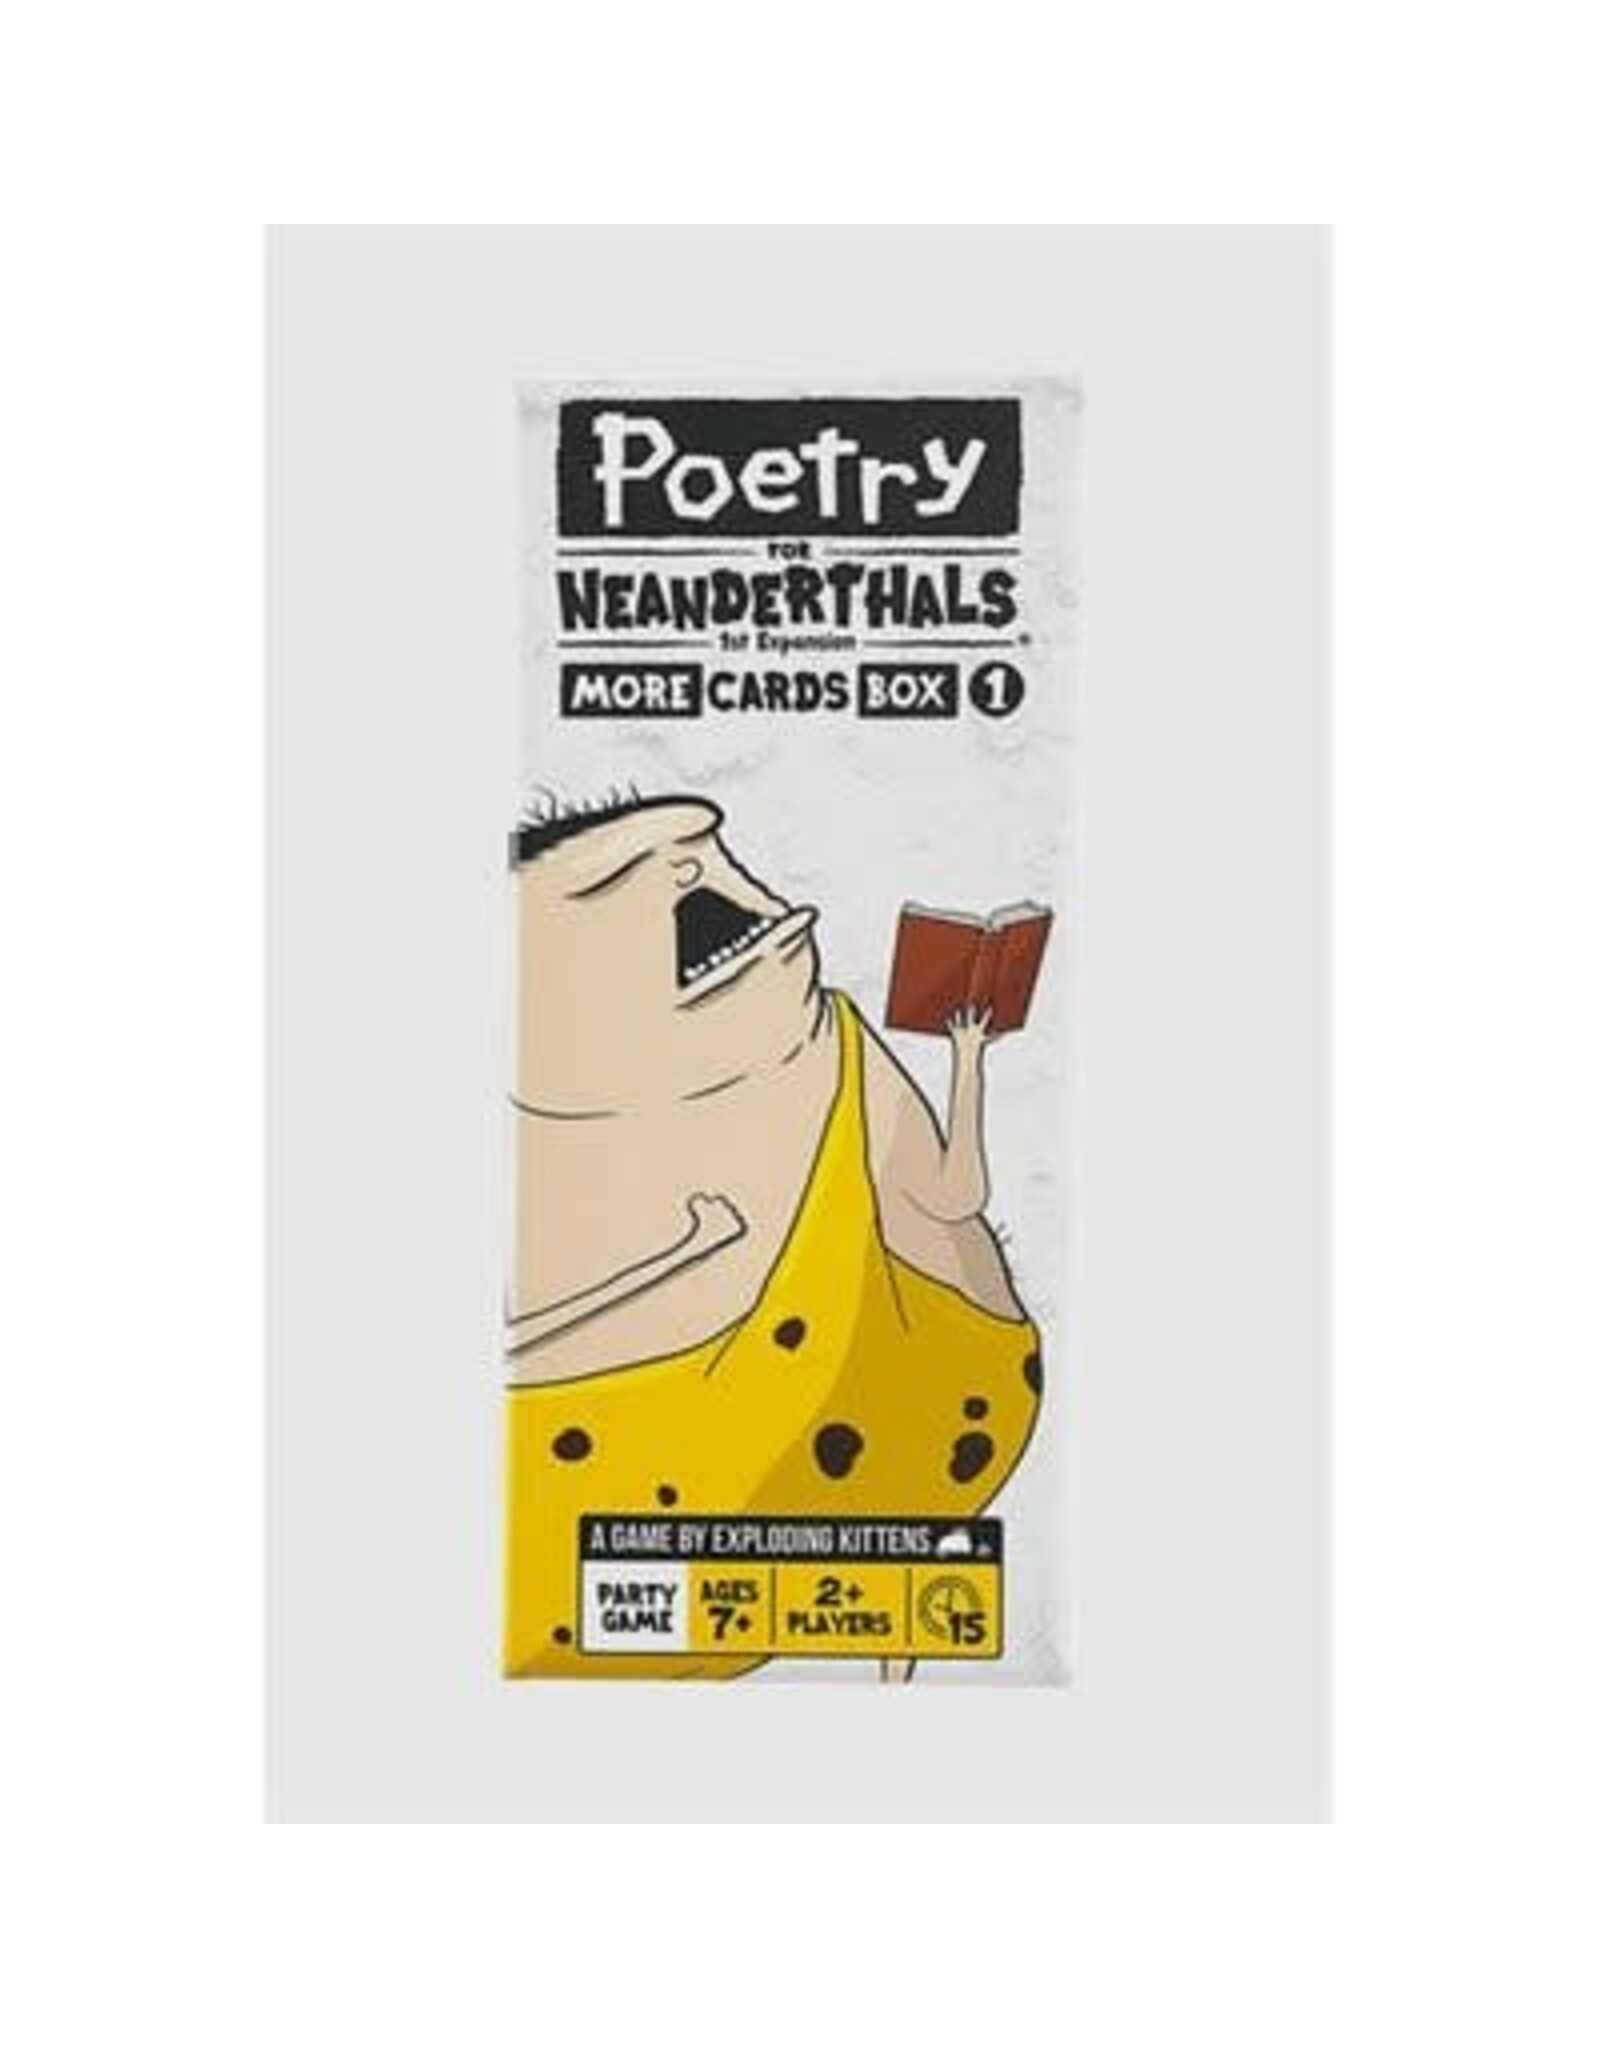 Poetry For Neanderthals: More Cards Box #1